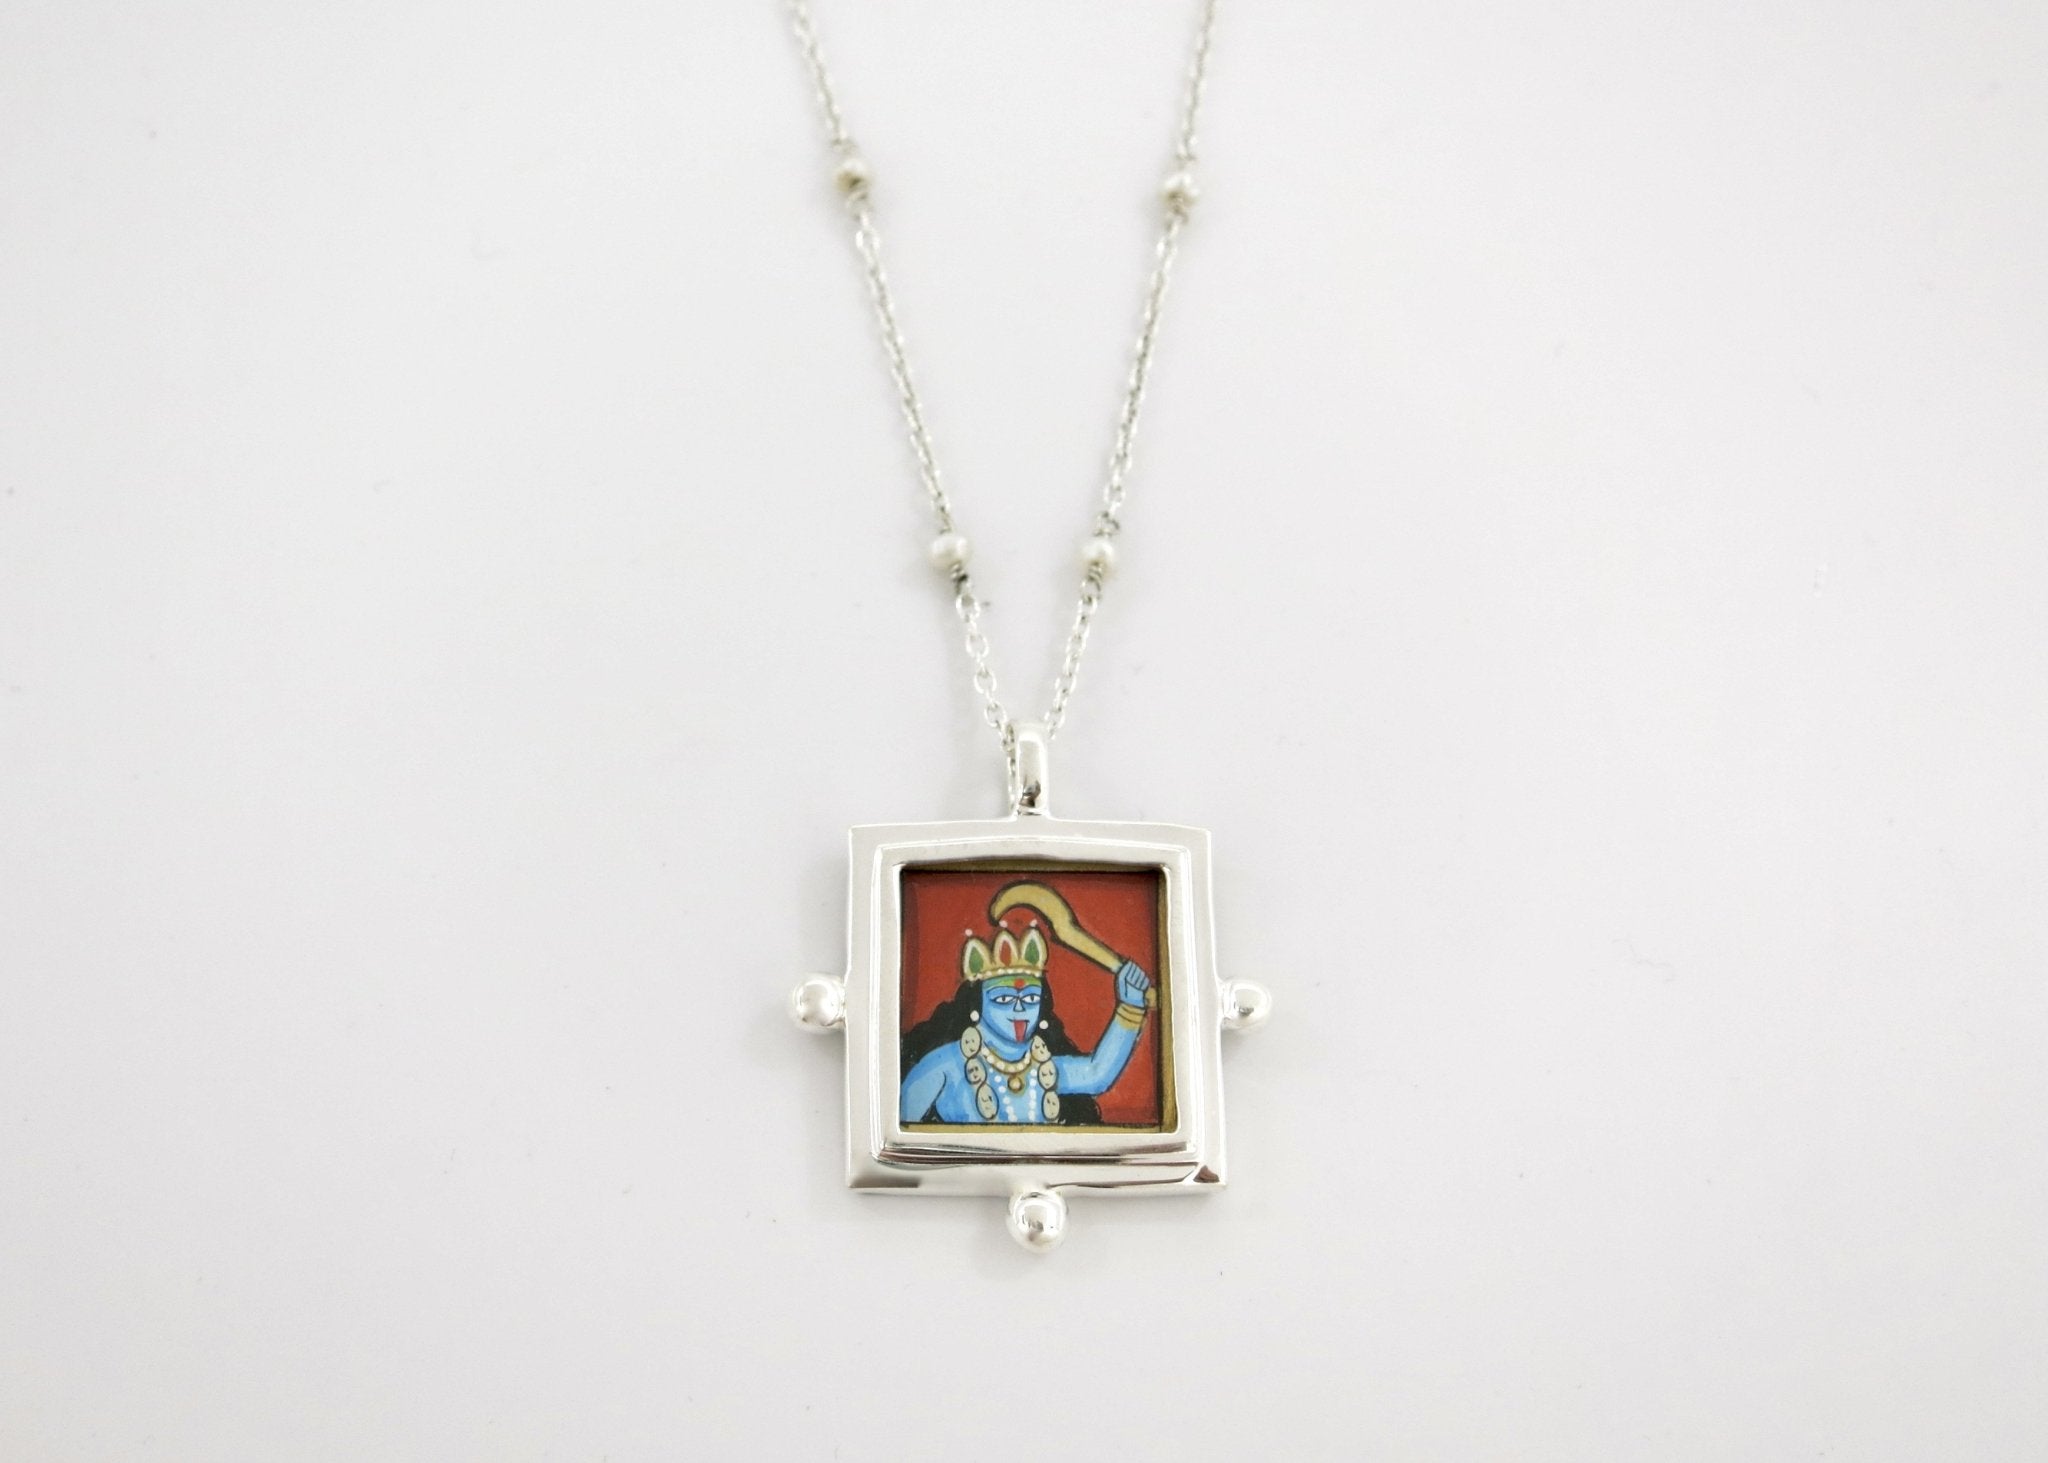 Kali (goddess) miniature painting pendant on a floating pearl chain - Lai